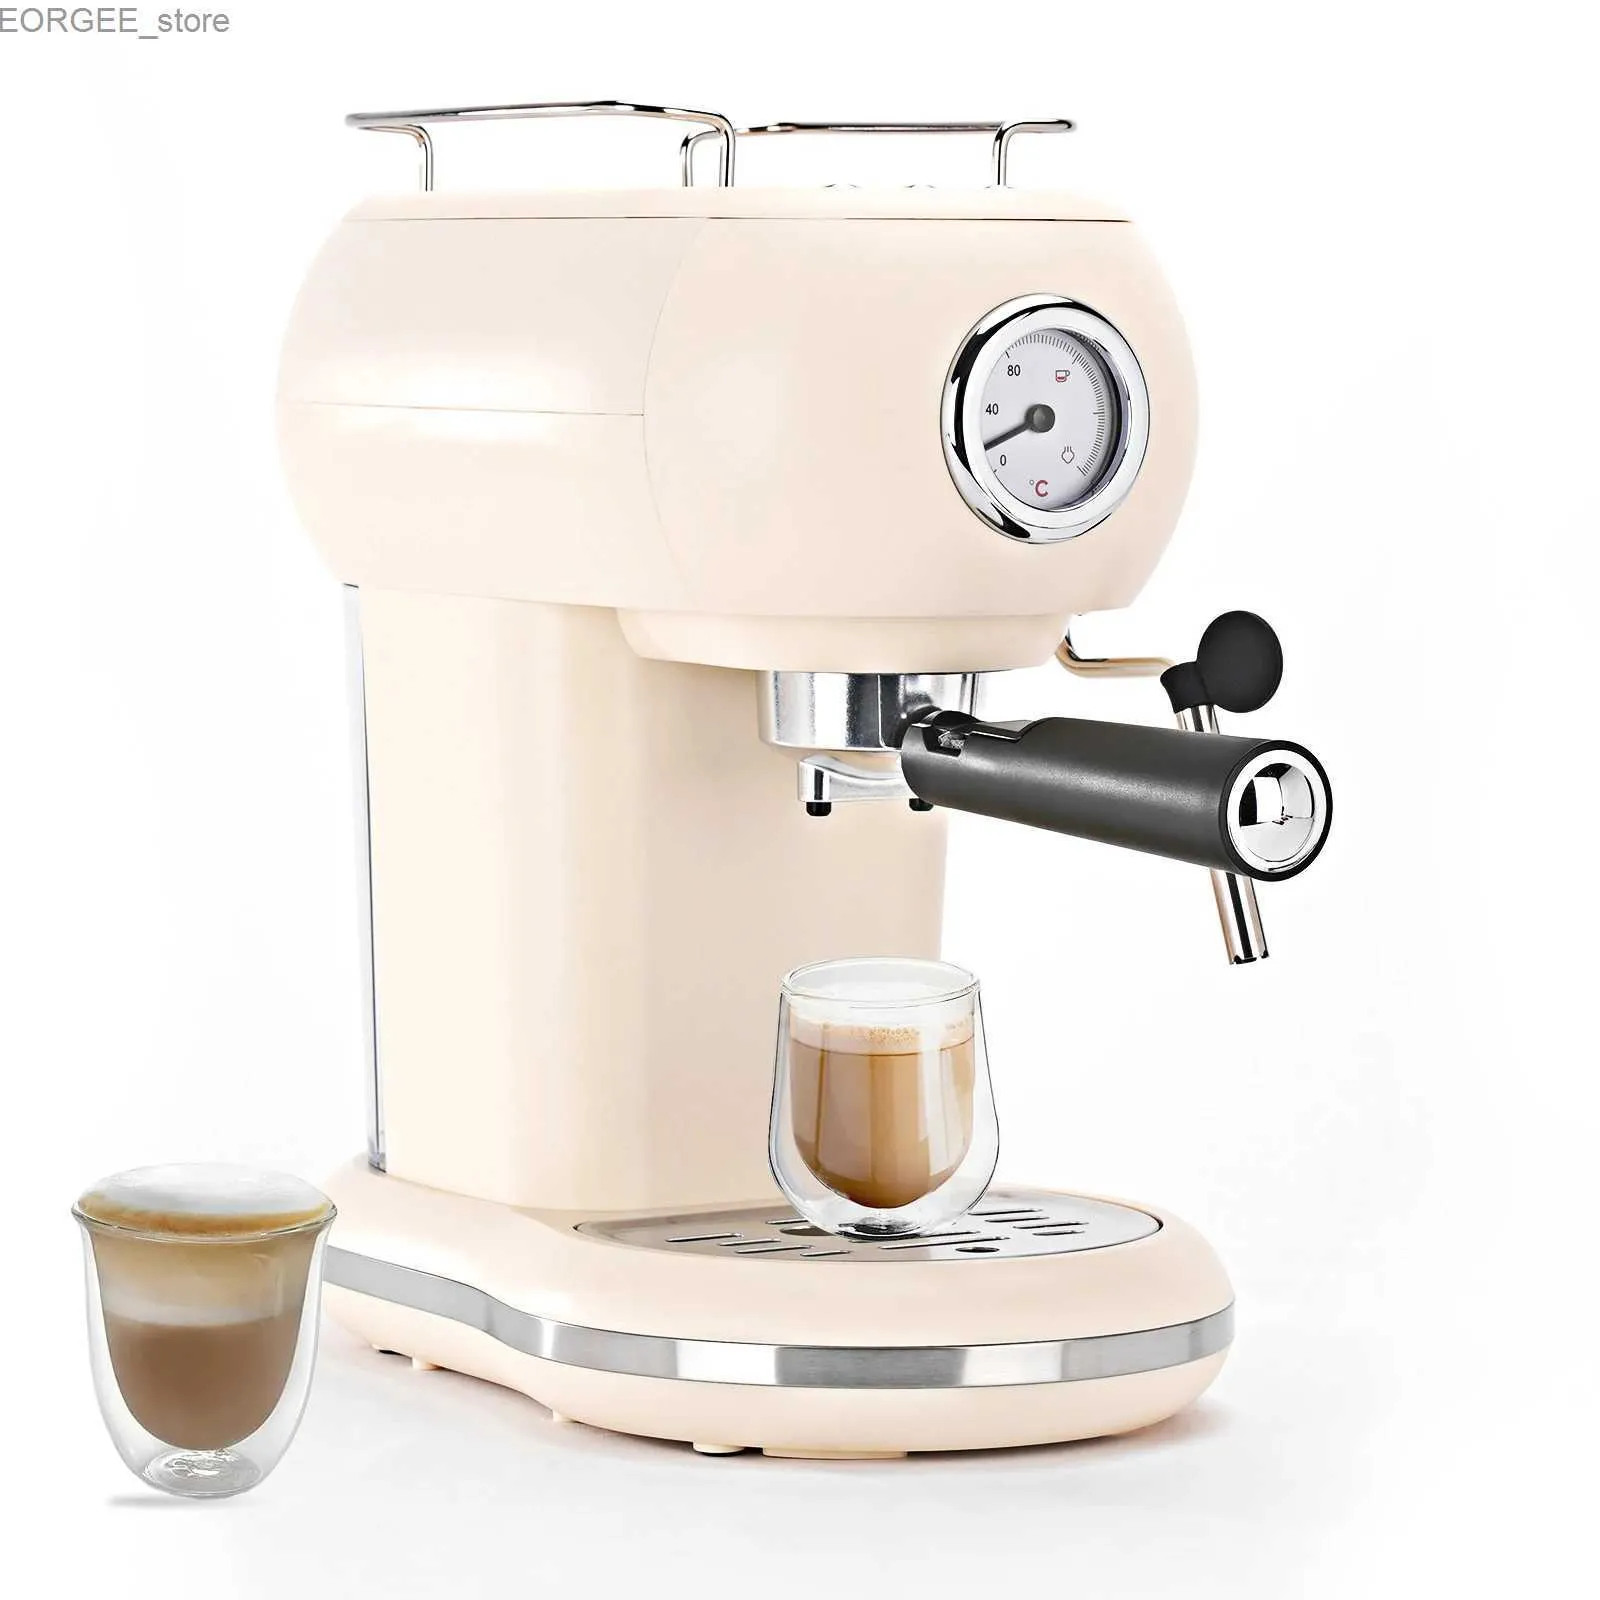 Coffee Makers The Mcilpoog 15Bar semiautomatic espresso machine is equipped with a powerful steam engine and a compact espresso machine for cappuccinos or lattes Y2